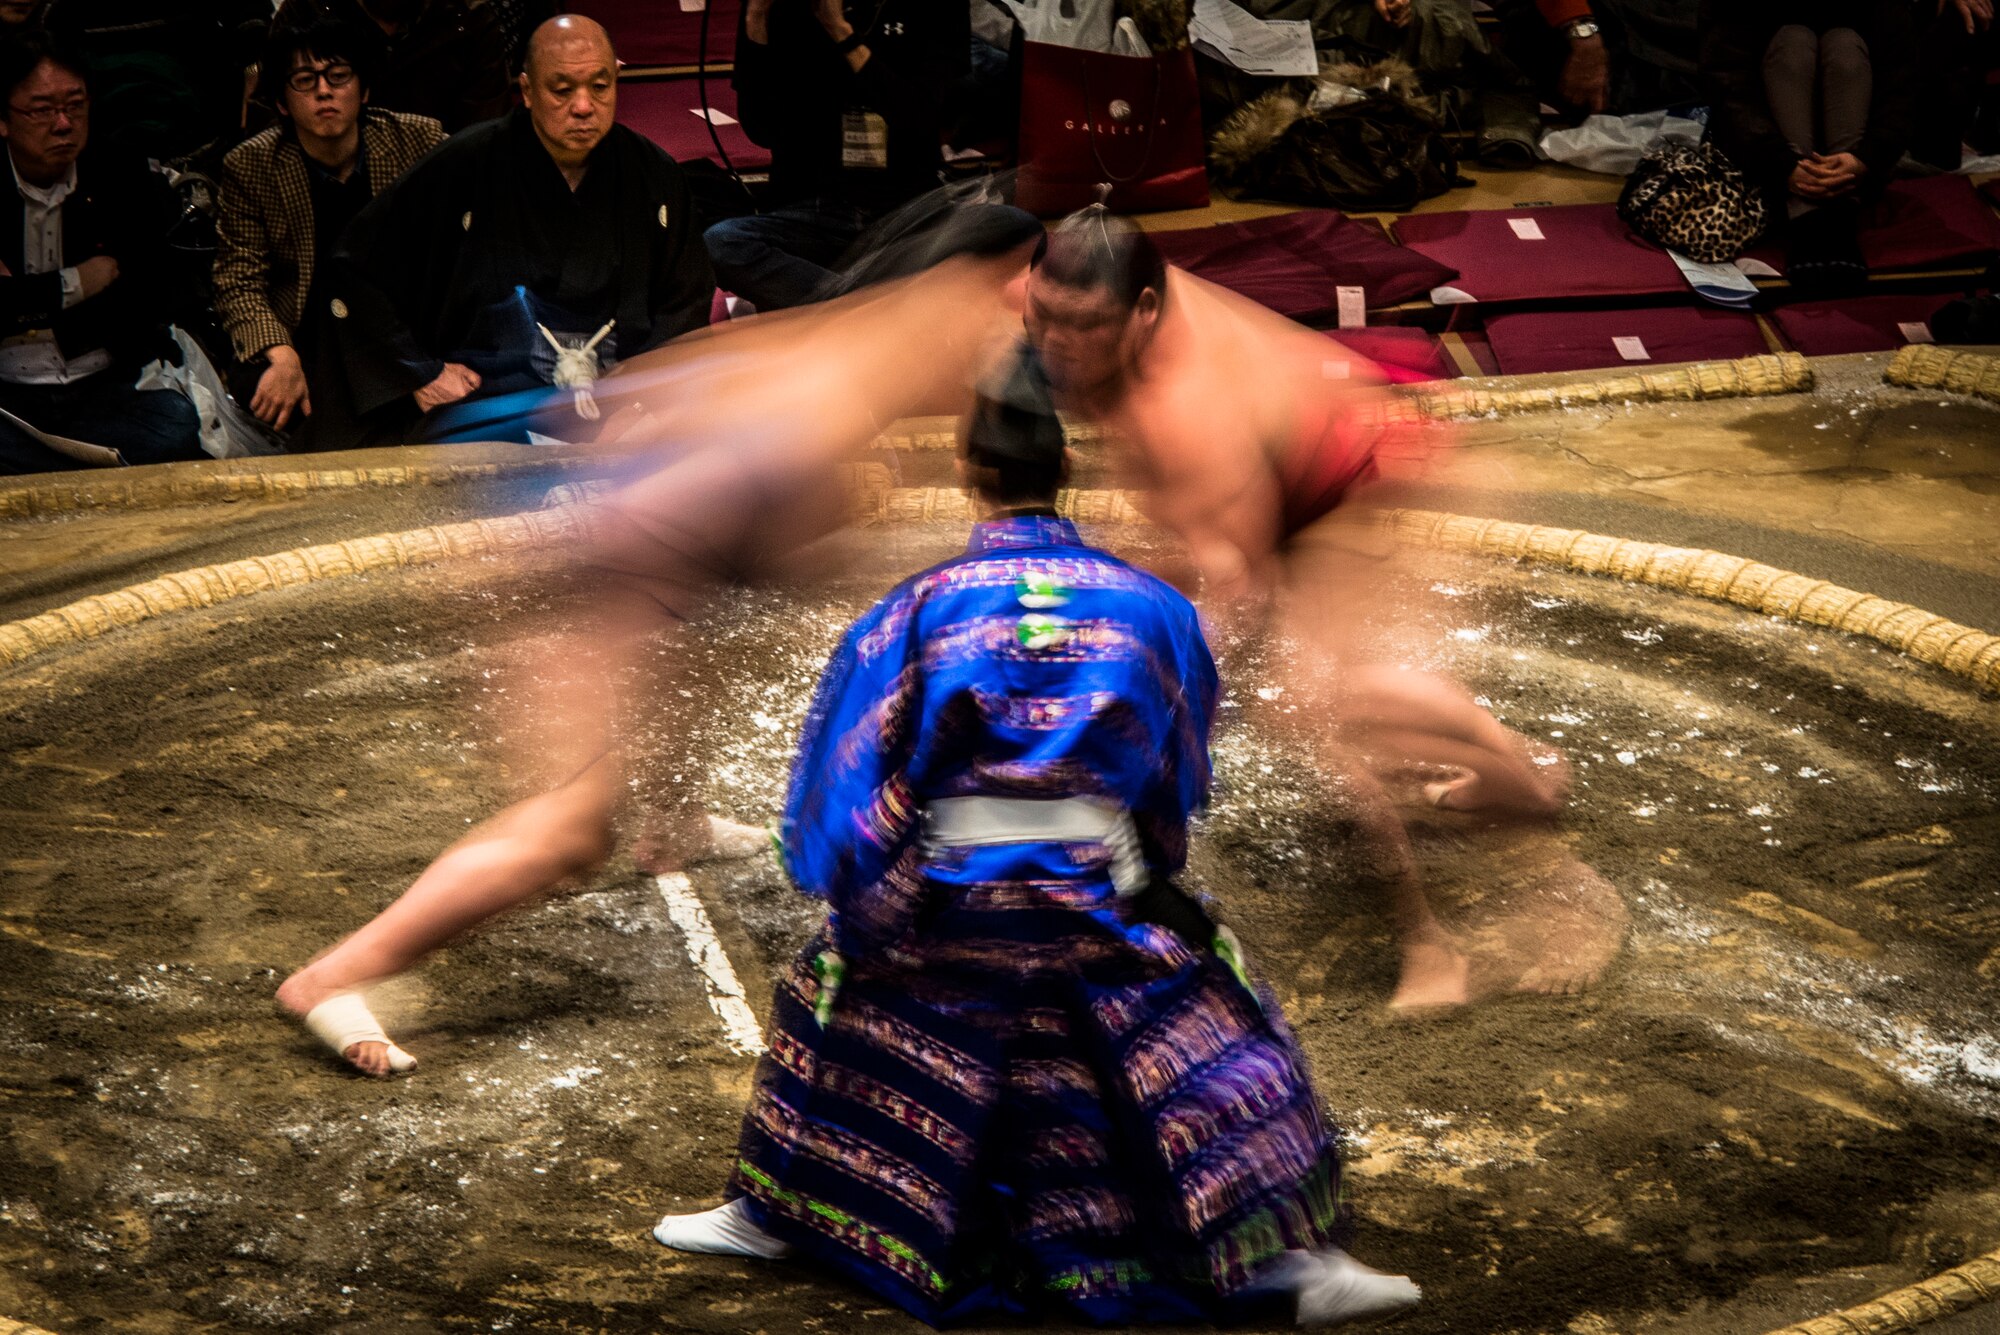 YOKOTA AIR BASE,Japan--Two Sumo wrestlers collide during the Grand Sumo Tournament at the Ryogoku Kokugikan Sumo Hall in Tokyo, Feb. 10, 2013. Being stationed at Yokota Air Base offers Airmen the chance to engage with the Japanese community and enjoy Japanese culture. (U.S. Air Force photo by Capt. Raymond Geoffroy)